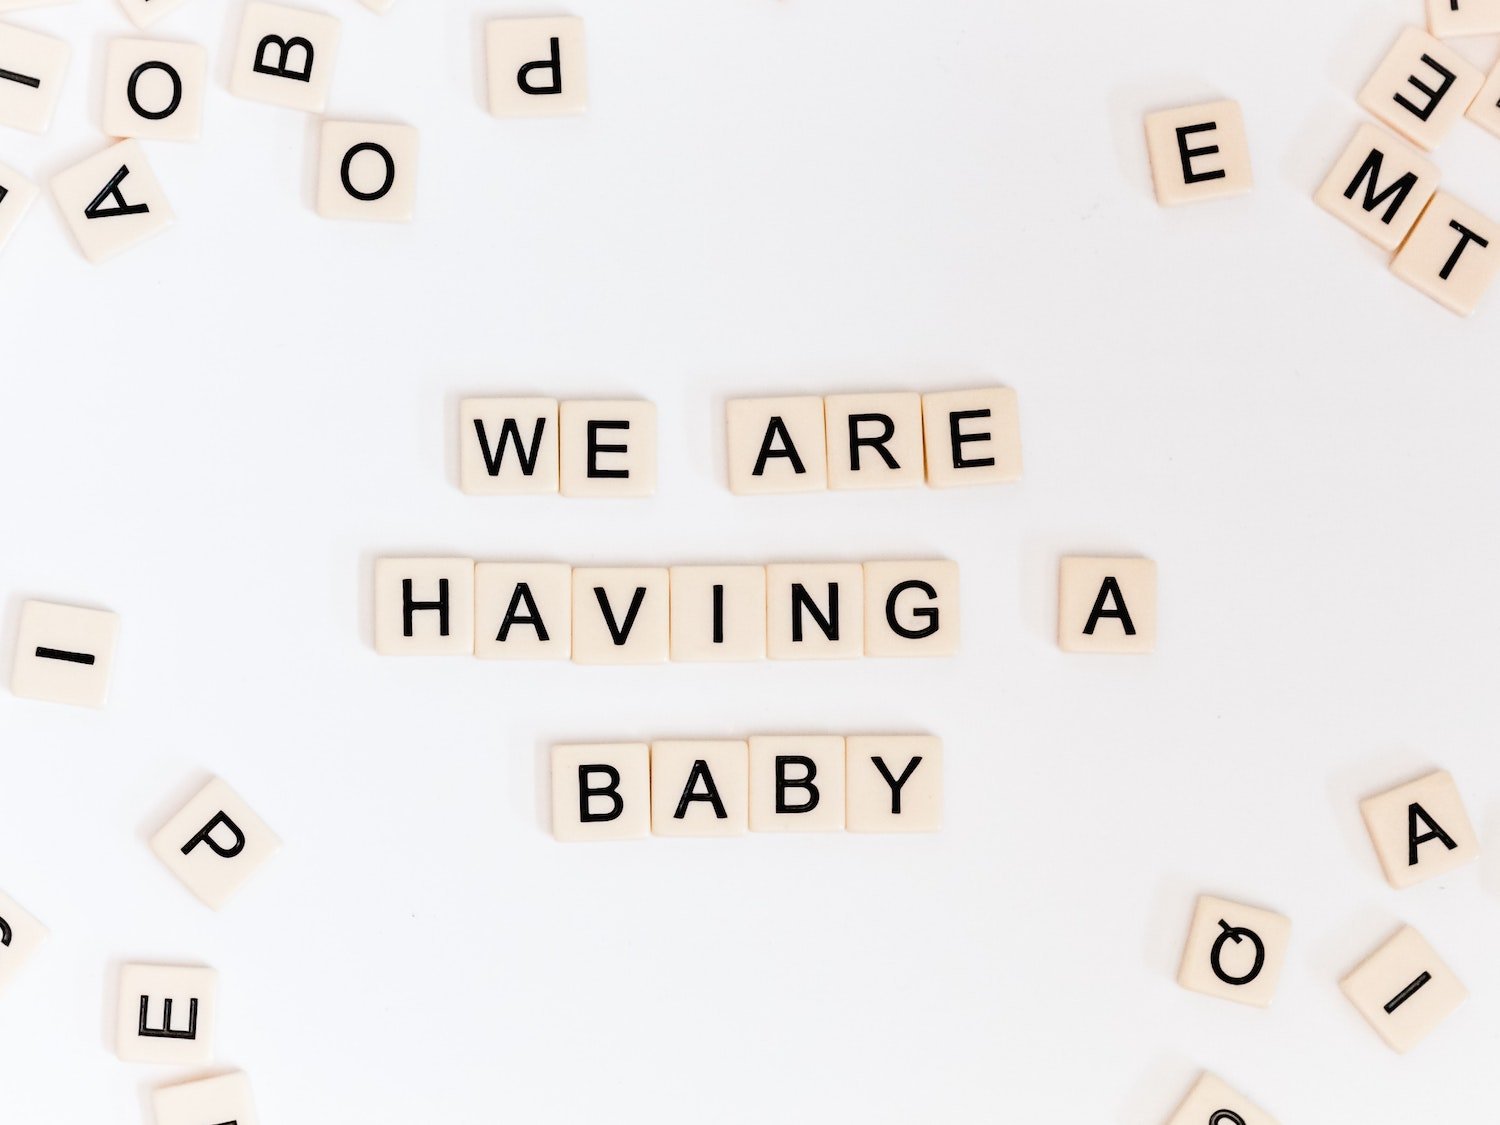 "We are having a baby" spelled out with Scrabble pieces